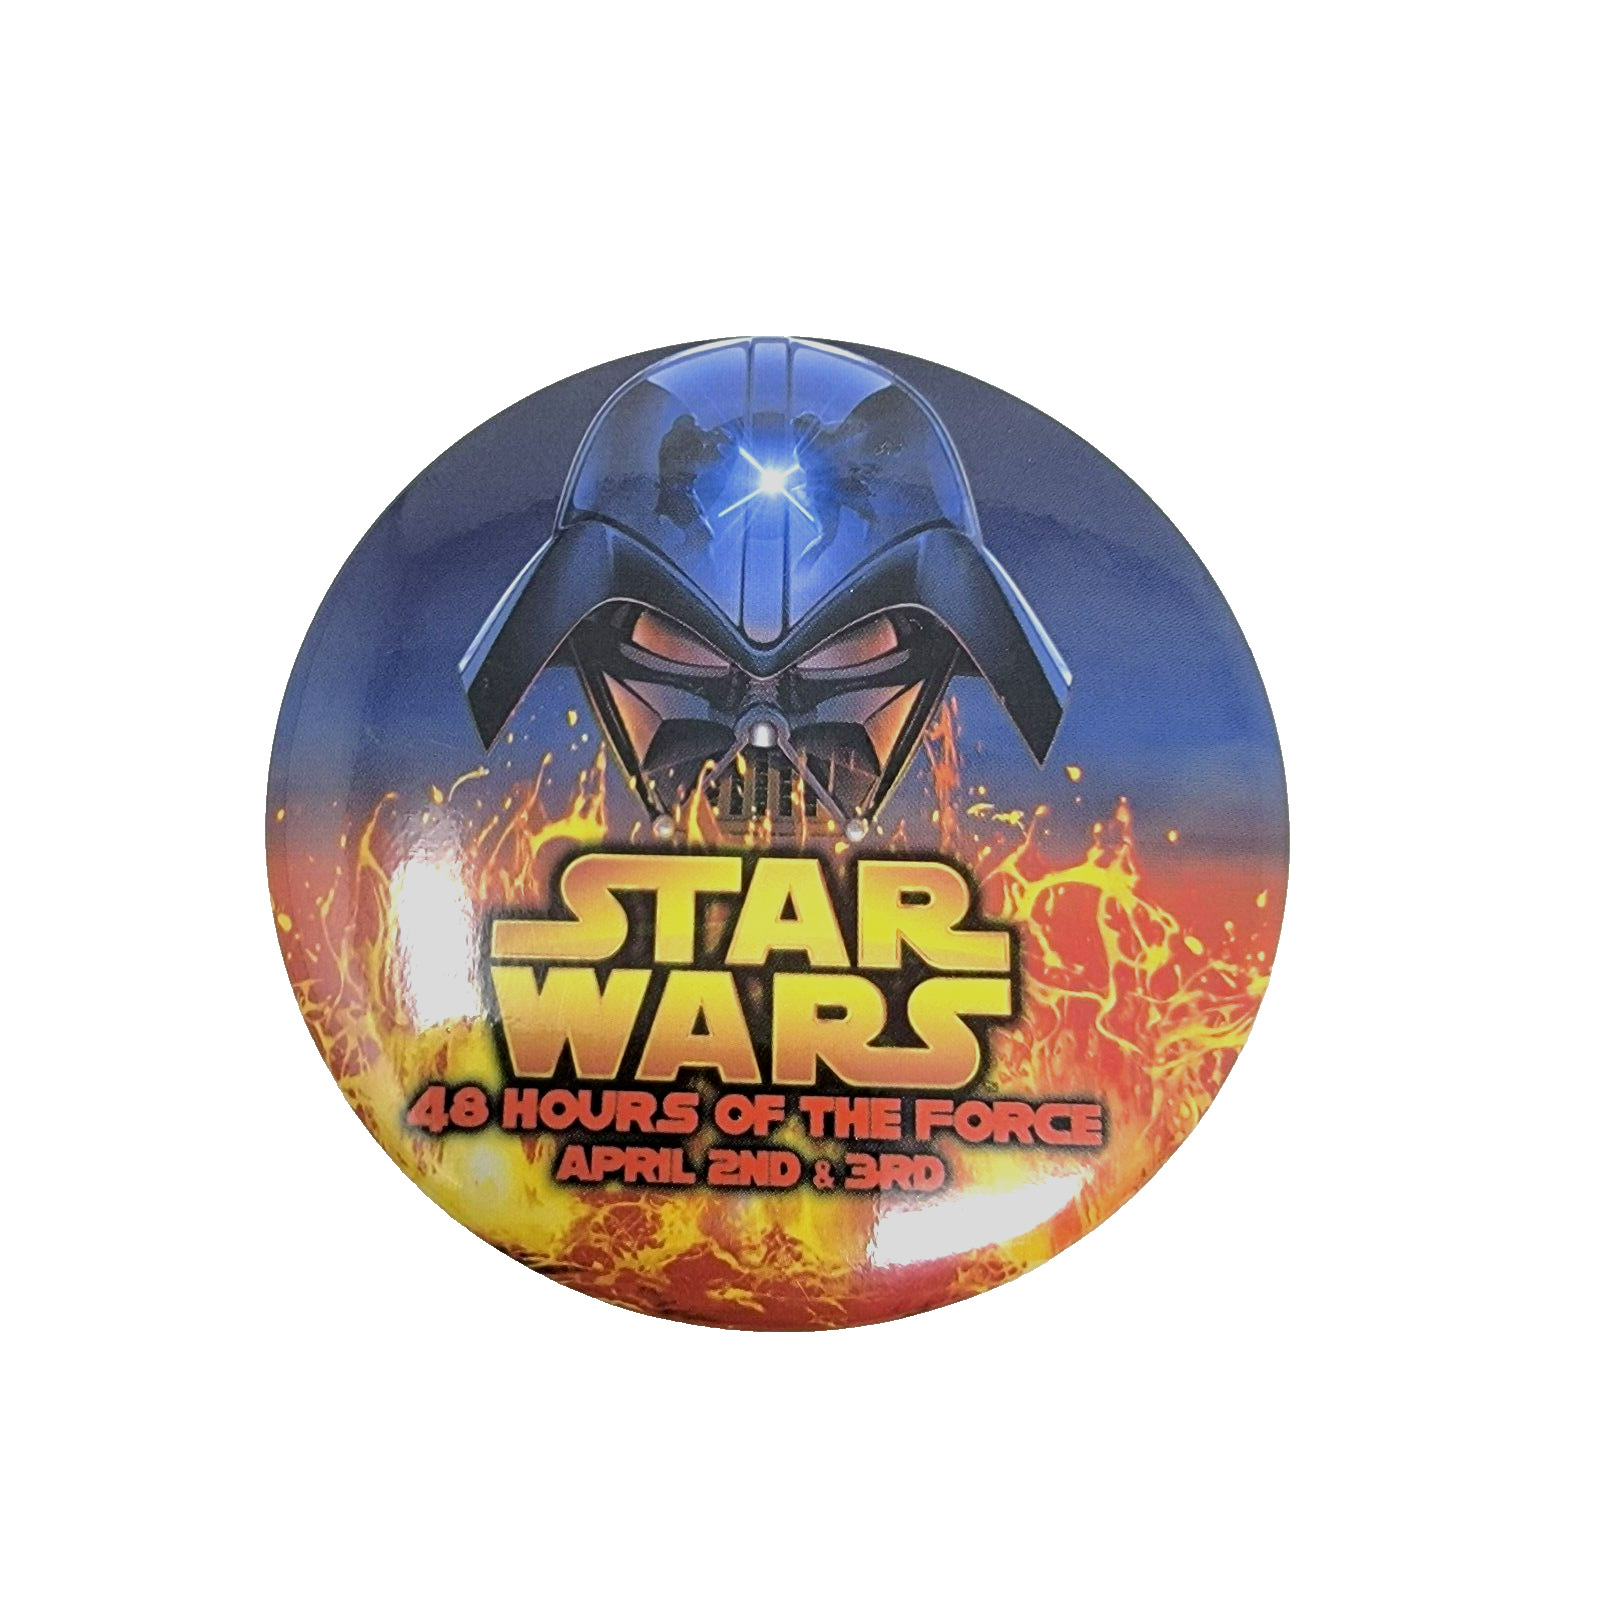 Star Wars Revenge of the Sith 48 Hours of the Force April 2nd 3rd Pin